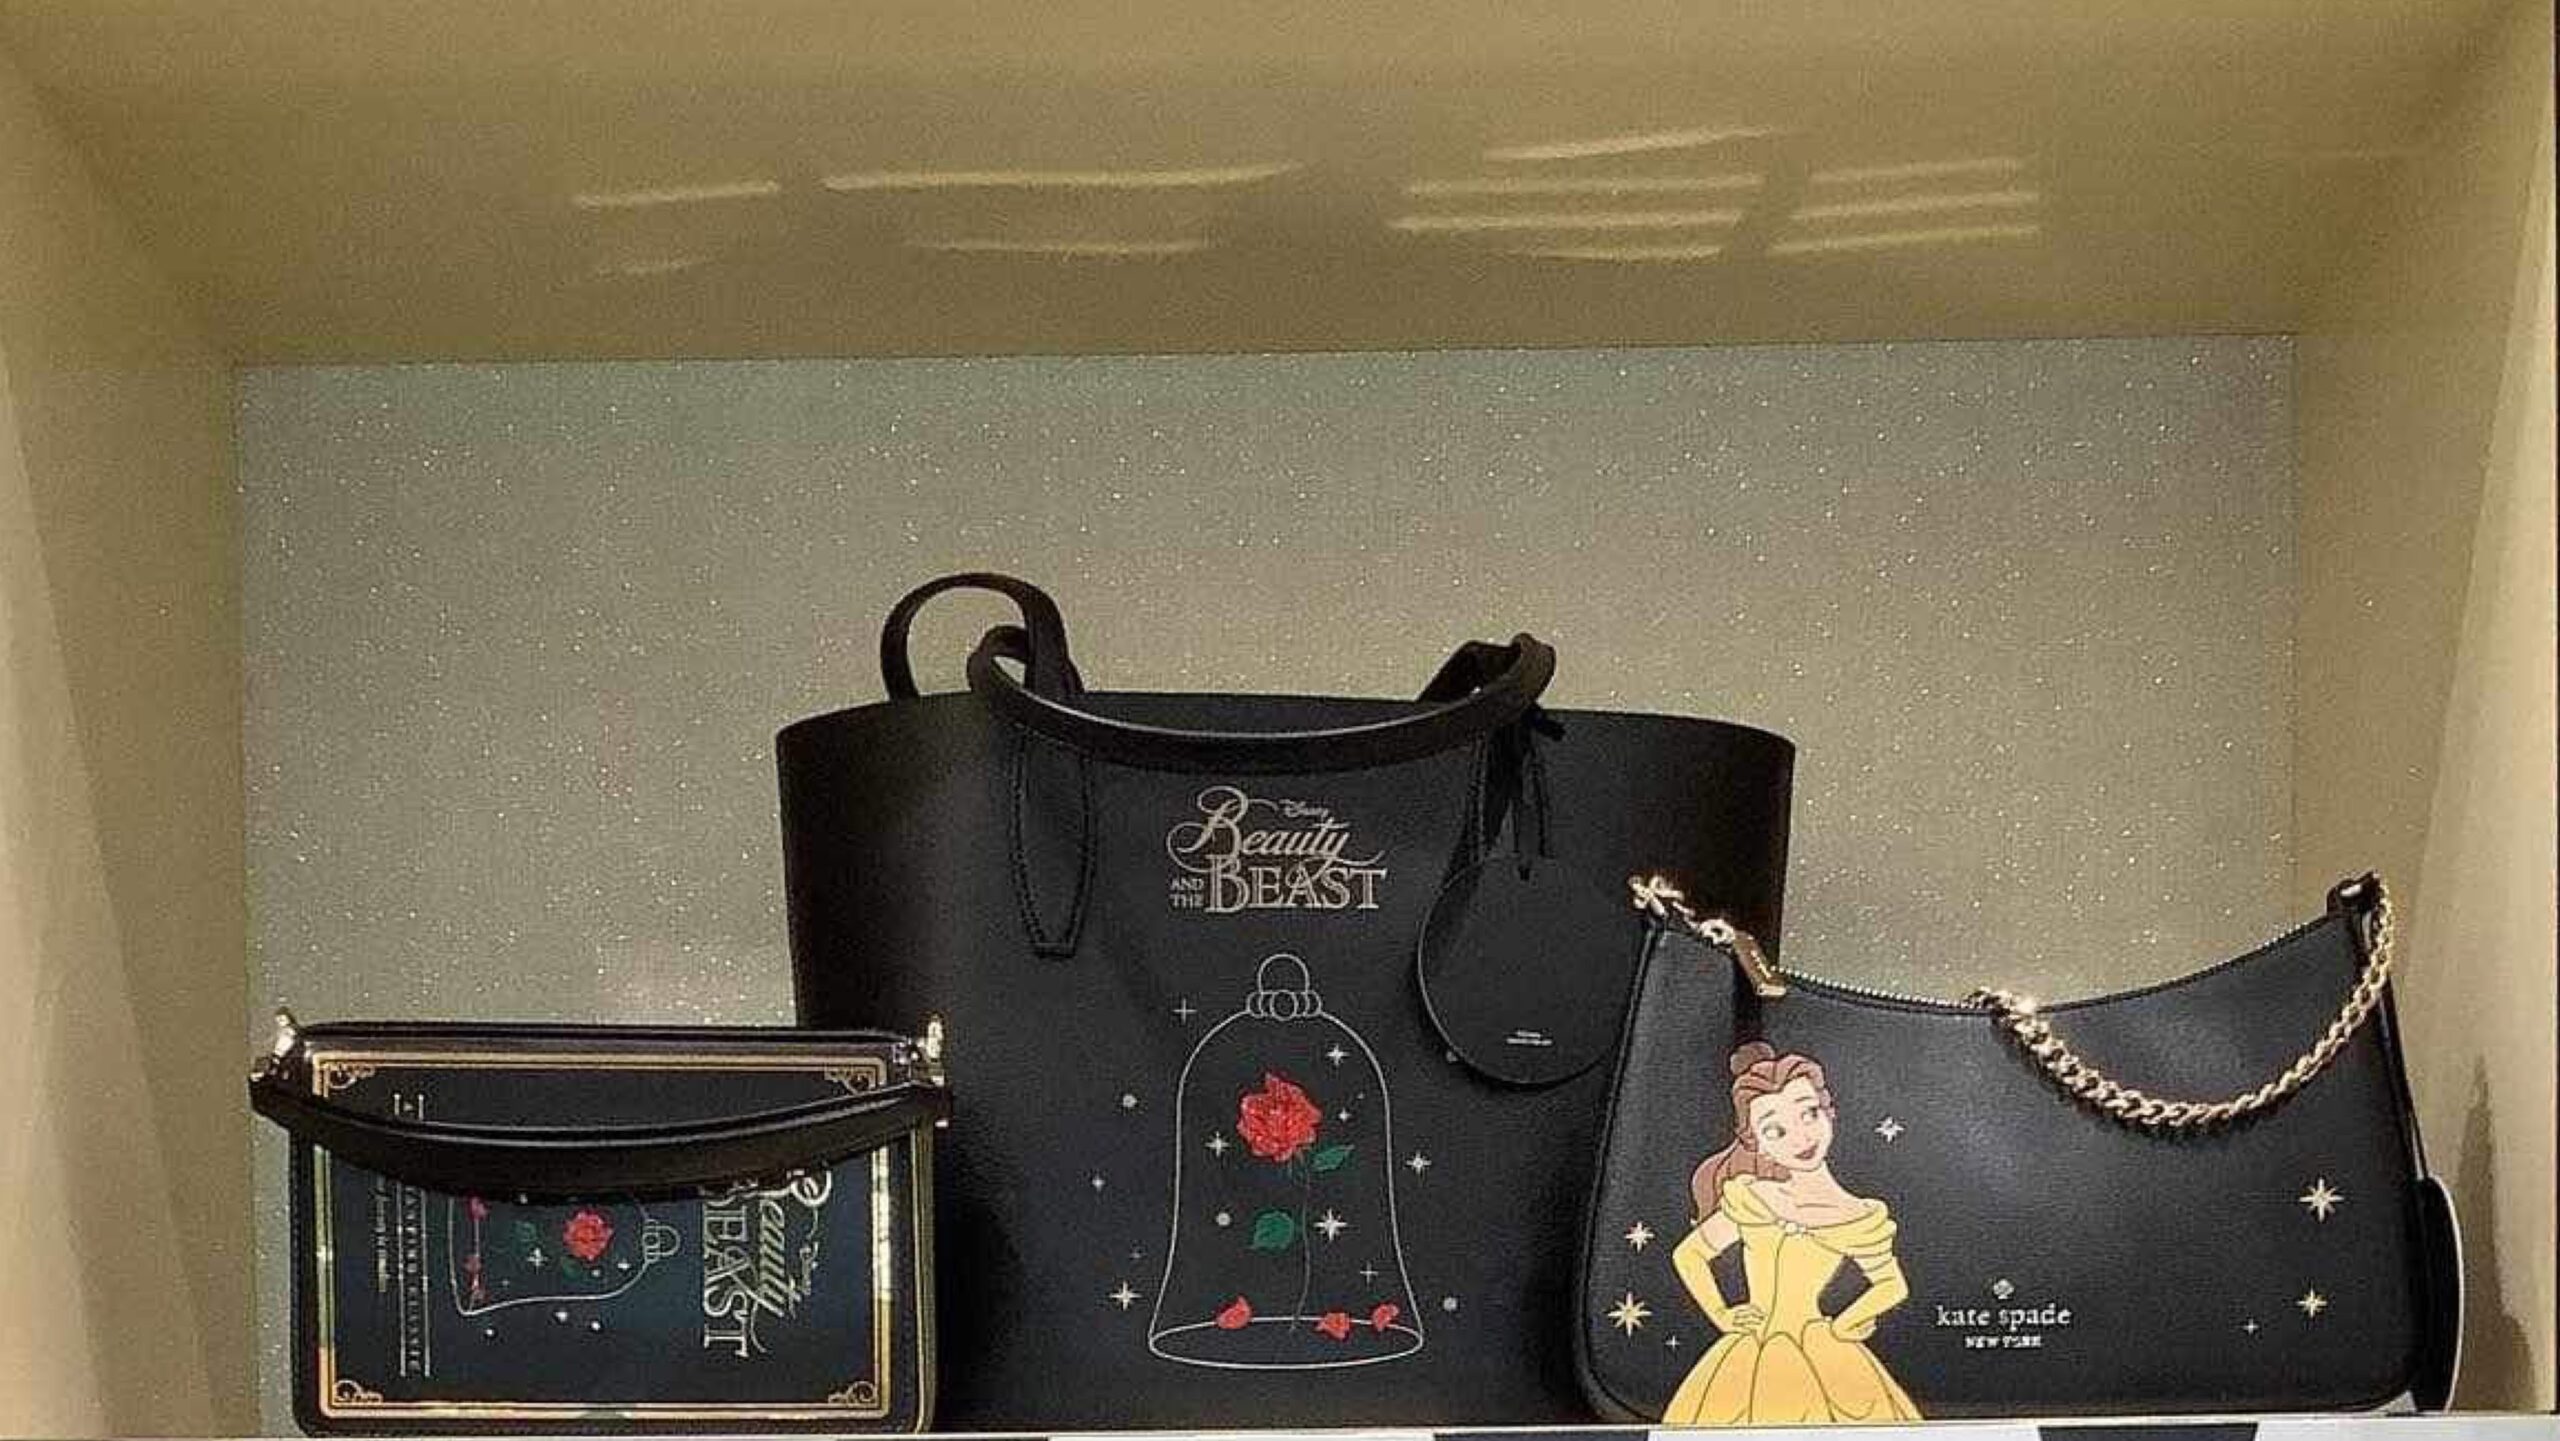 Loungefly Beauty and the Beast Purse - Bags and purses